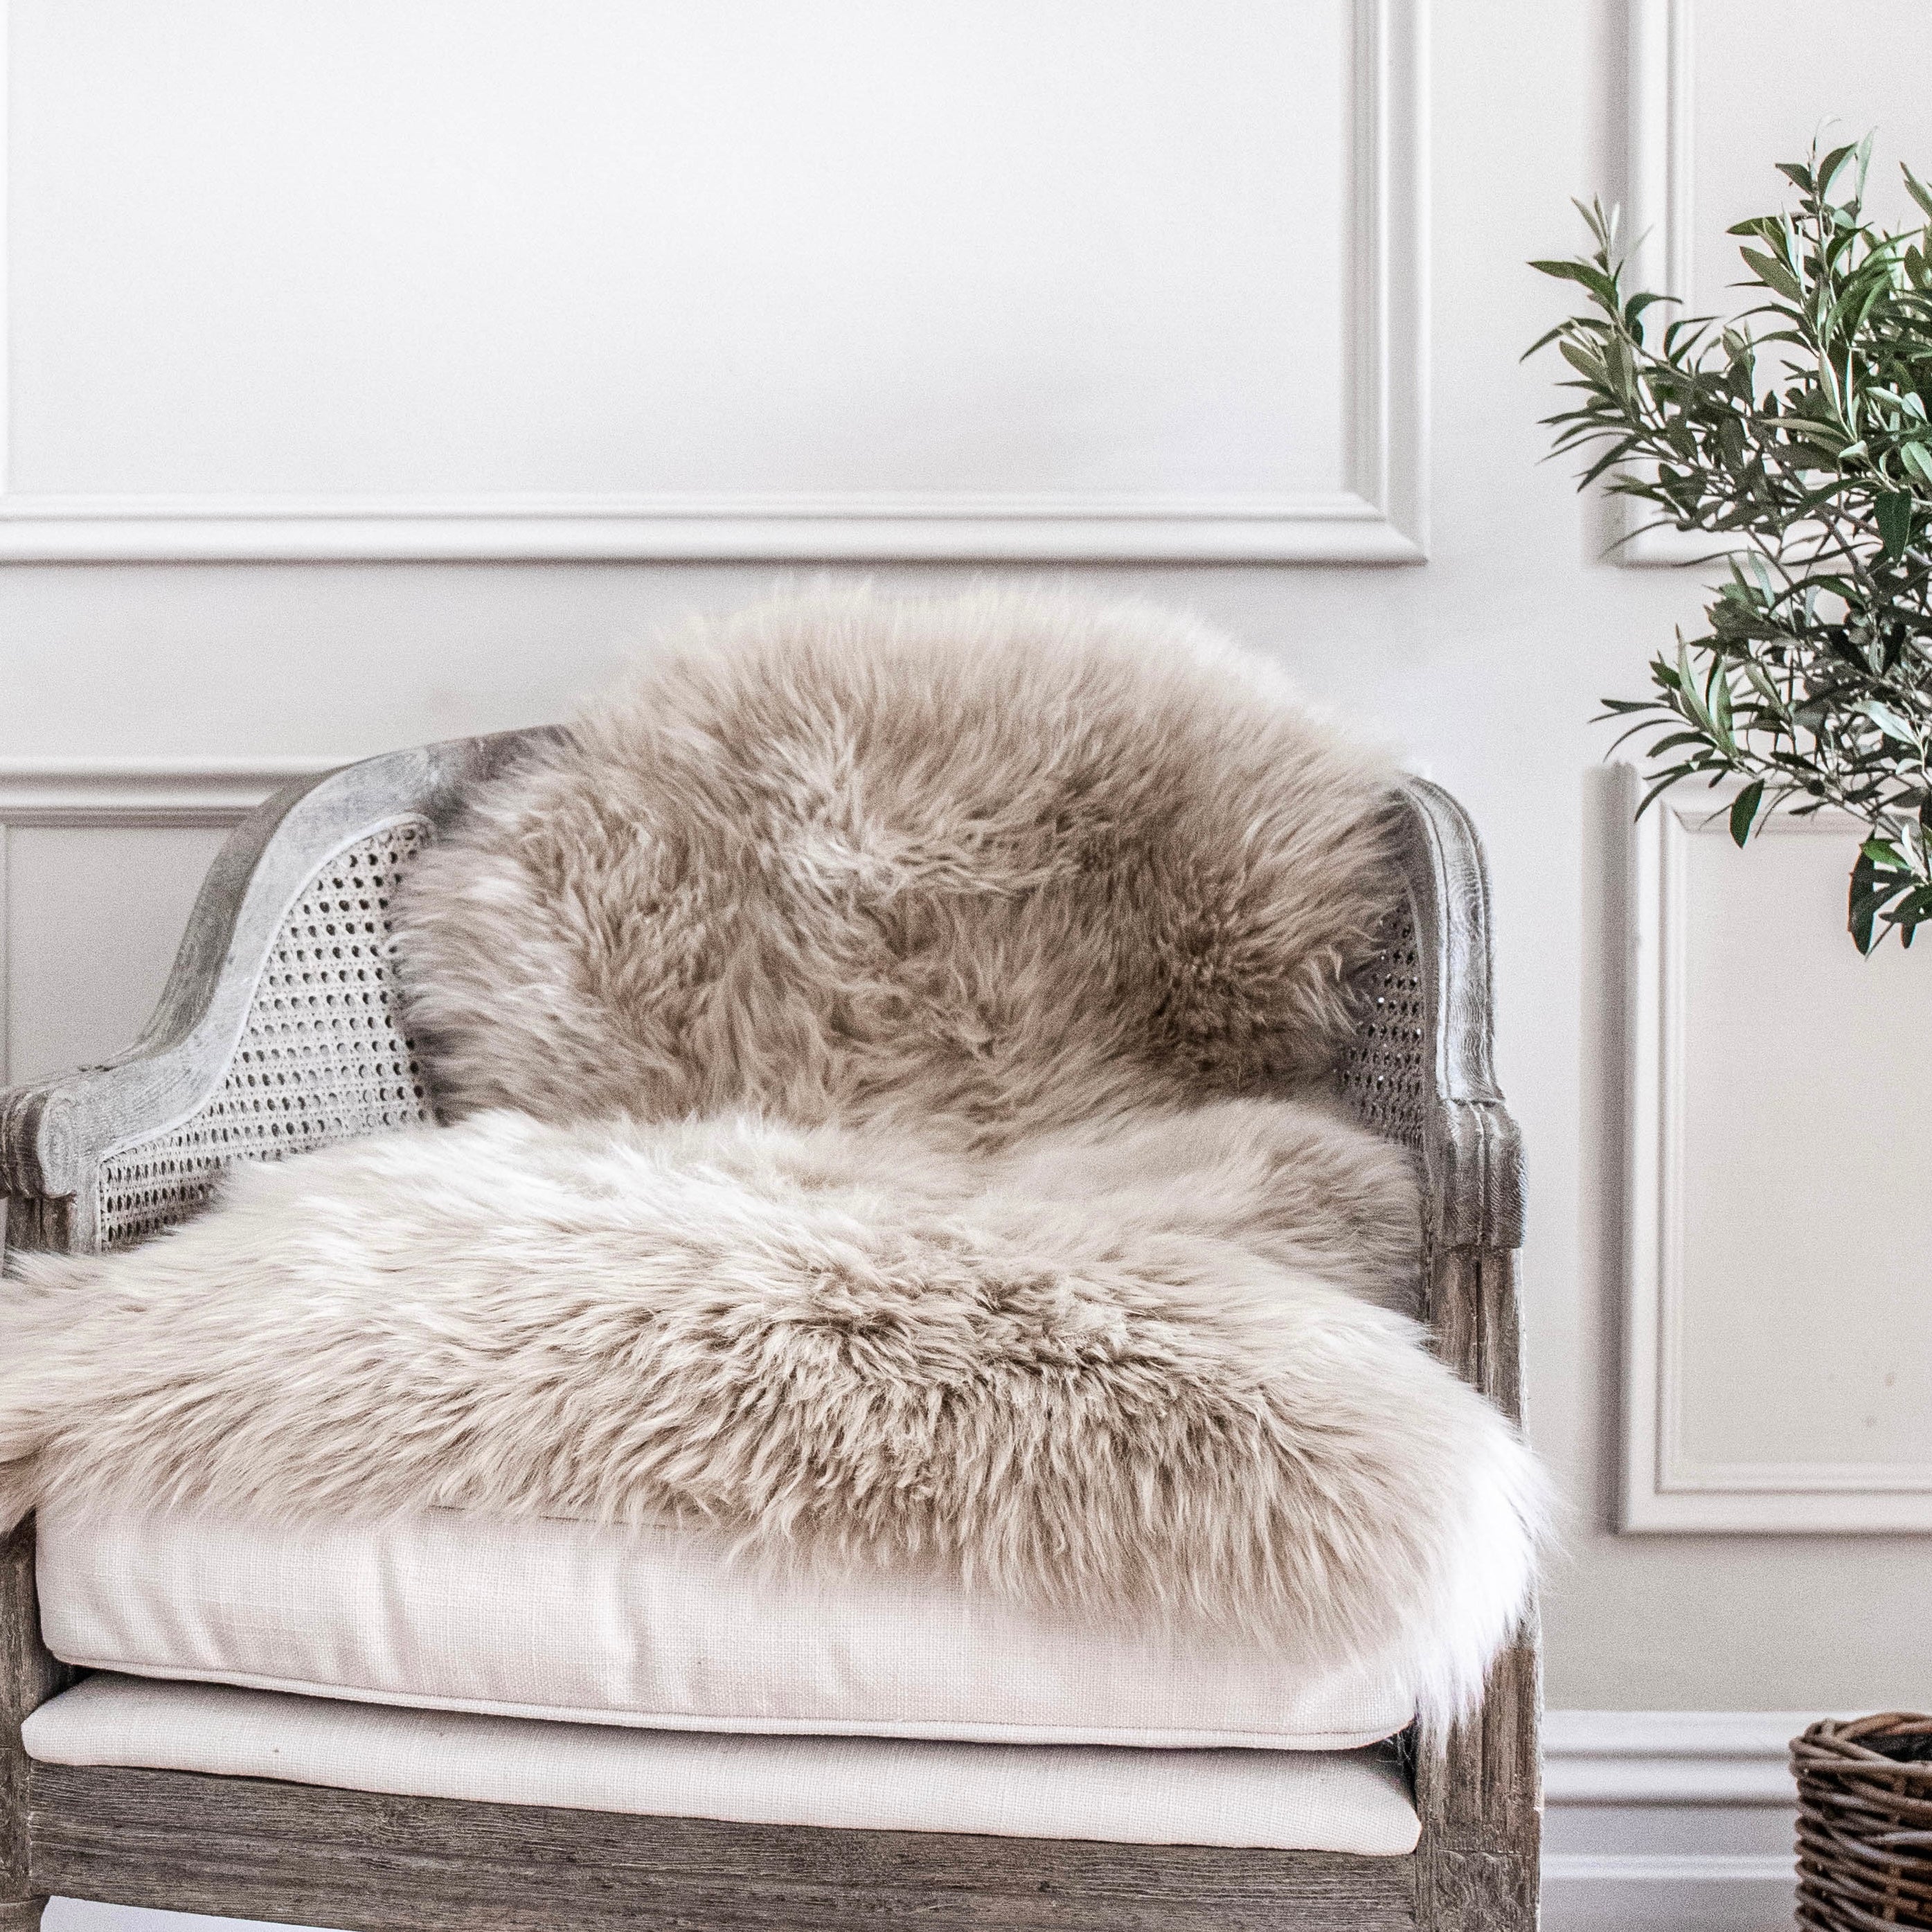 Complimentary Luxe Sheepskin in oyster